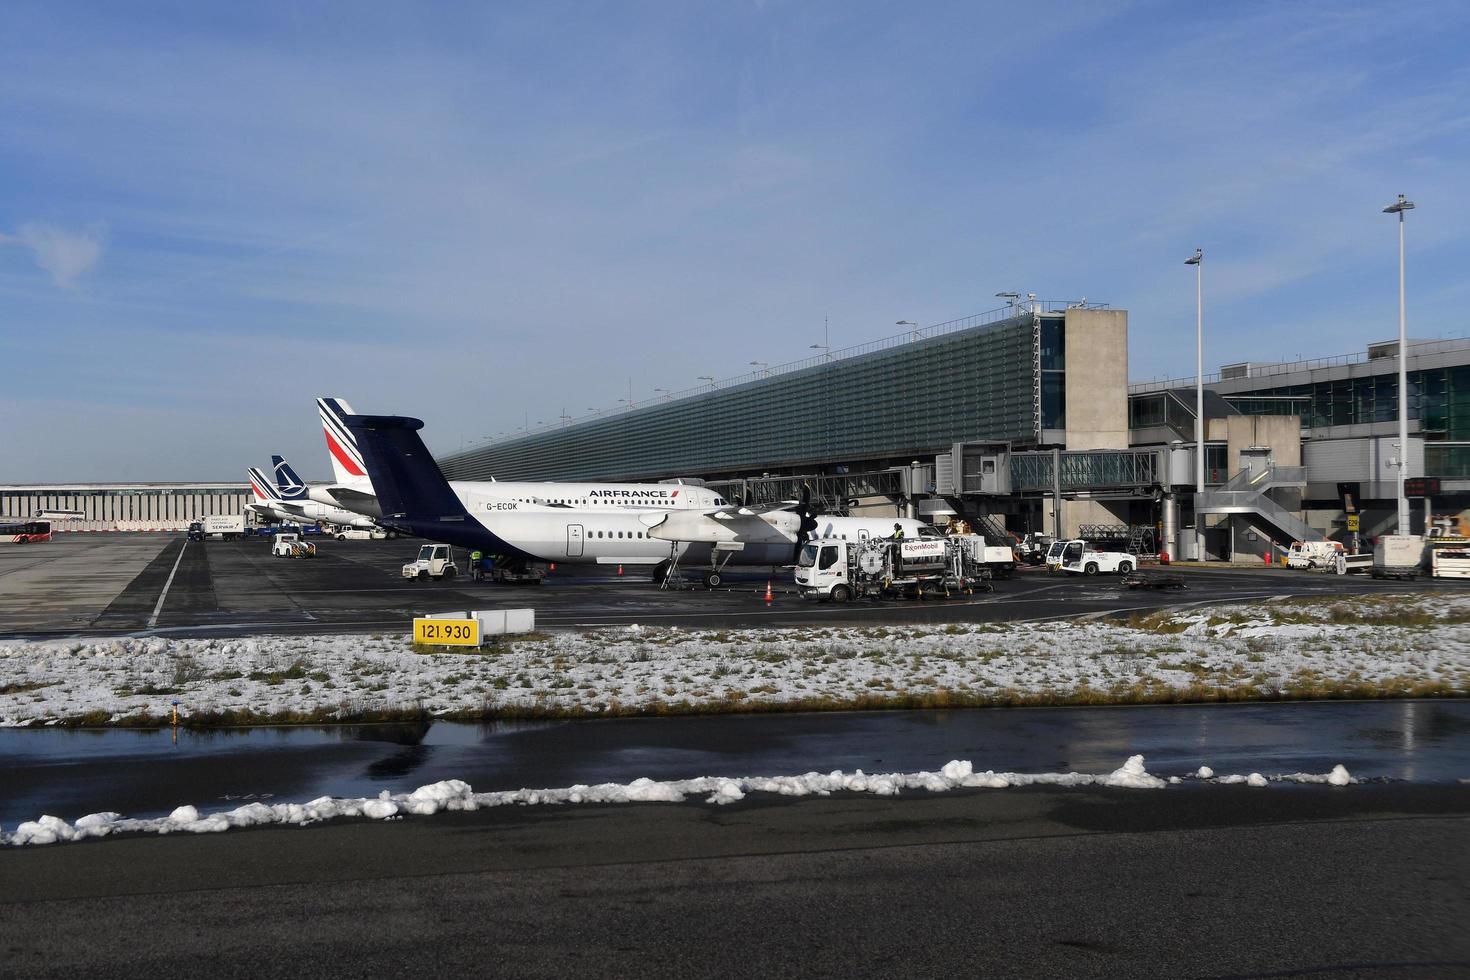 PARIS, FRANCE - FEBRUARY 10 2018 - paris airport covered by snow photo